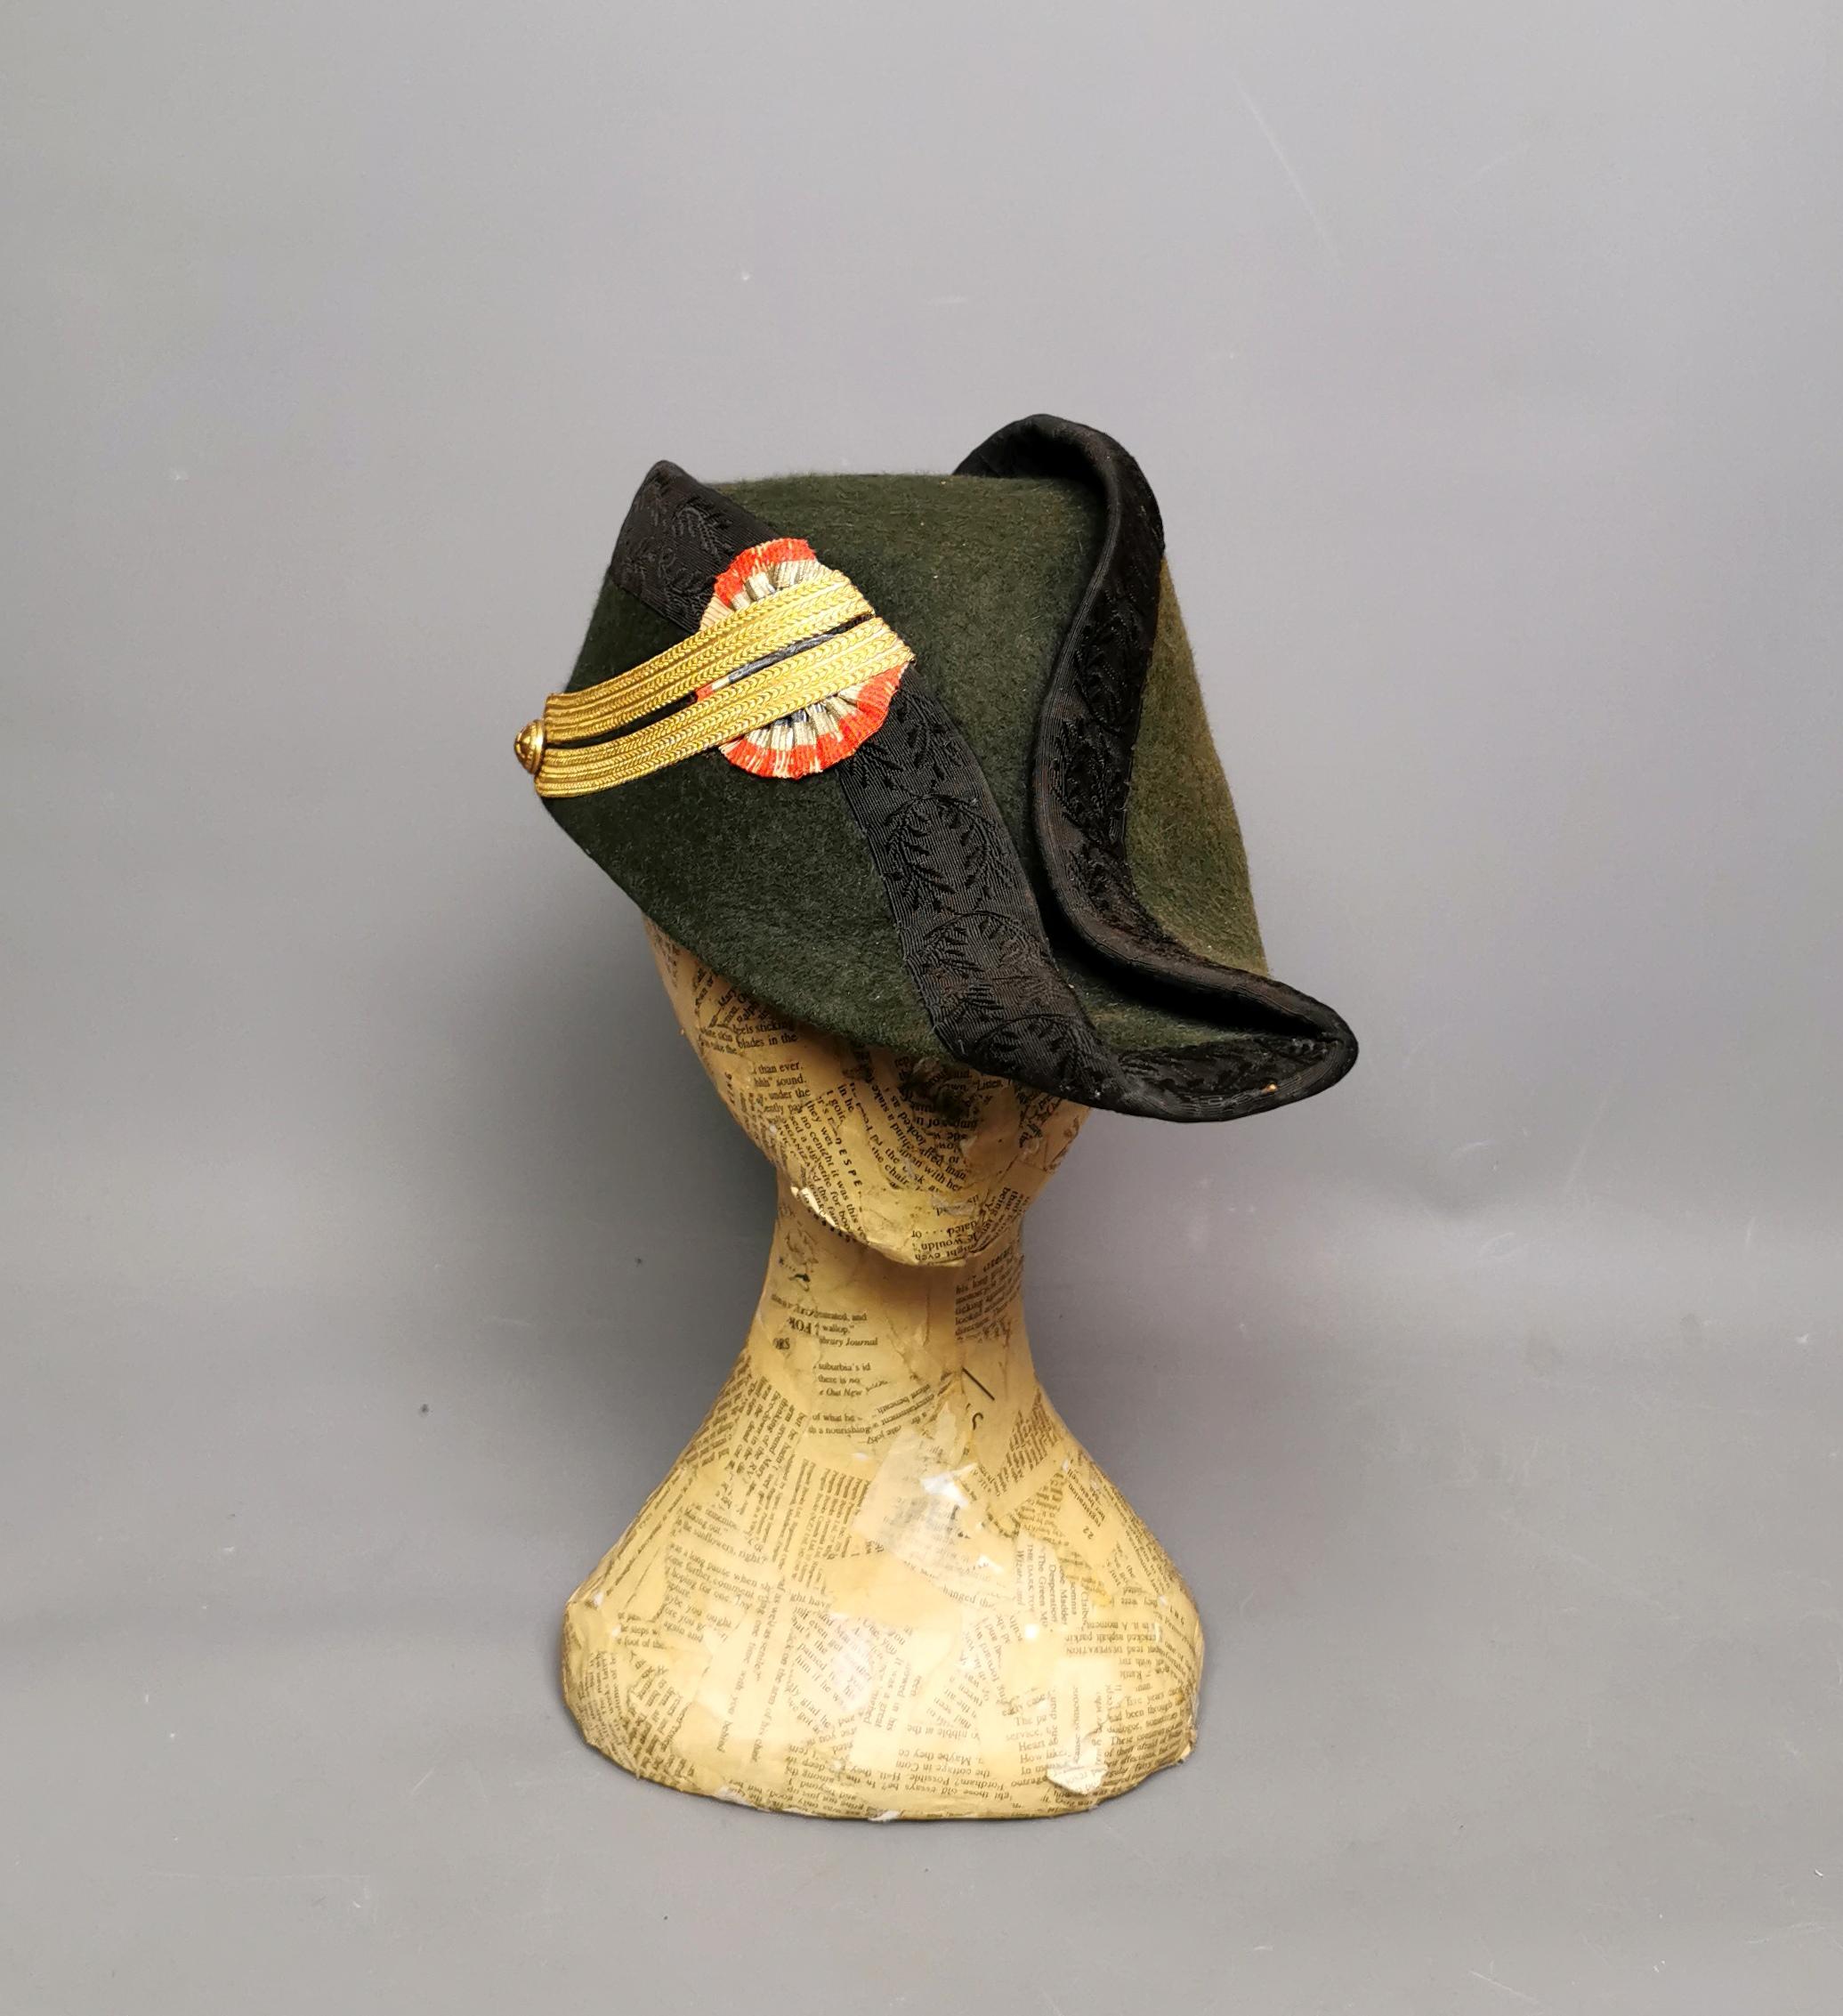 A fantastic antique French bicorn military hat.

This gorgeous and scarce piece is not only a piece of fashion history but also a fantastic military relic.

It is made from a deep forest green felt, very stiff and well formed.

The hat is trimmed in